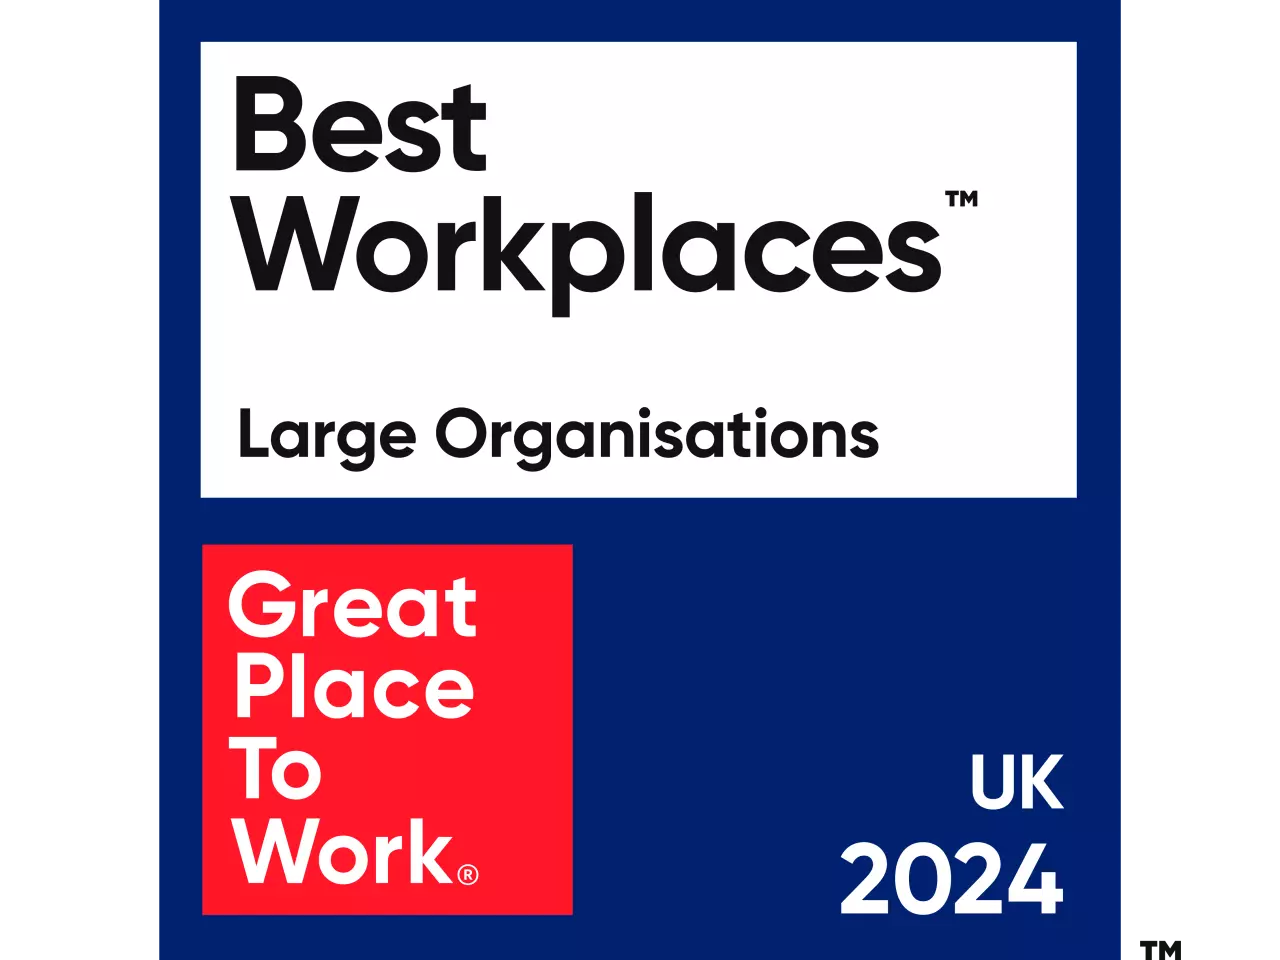 Best Workplaces UK 2024